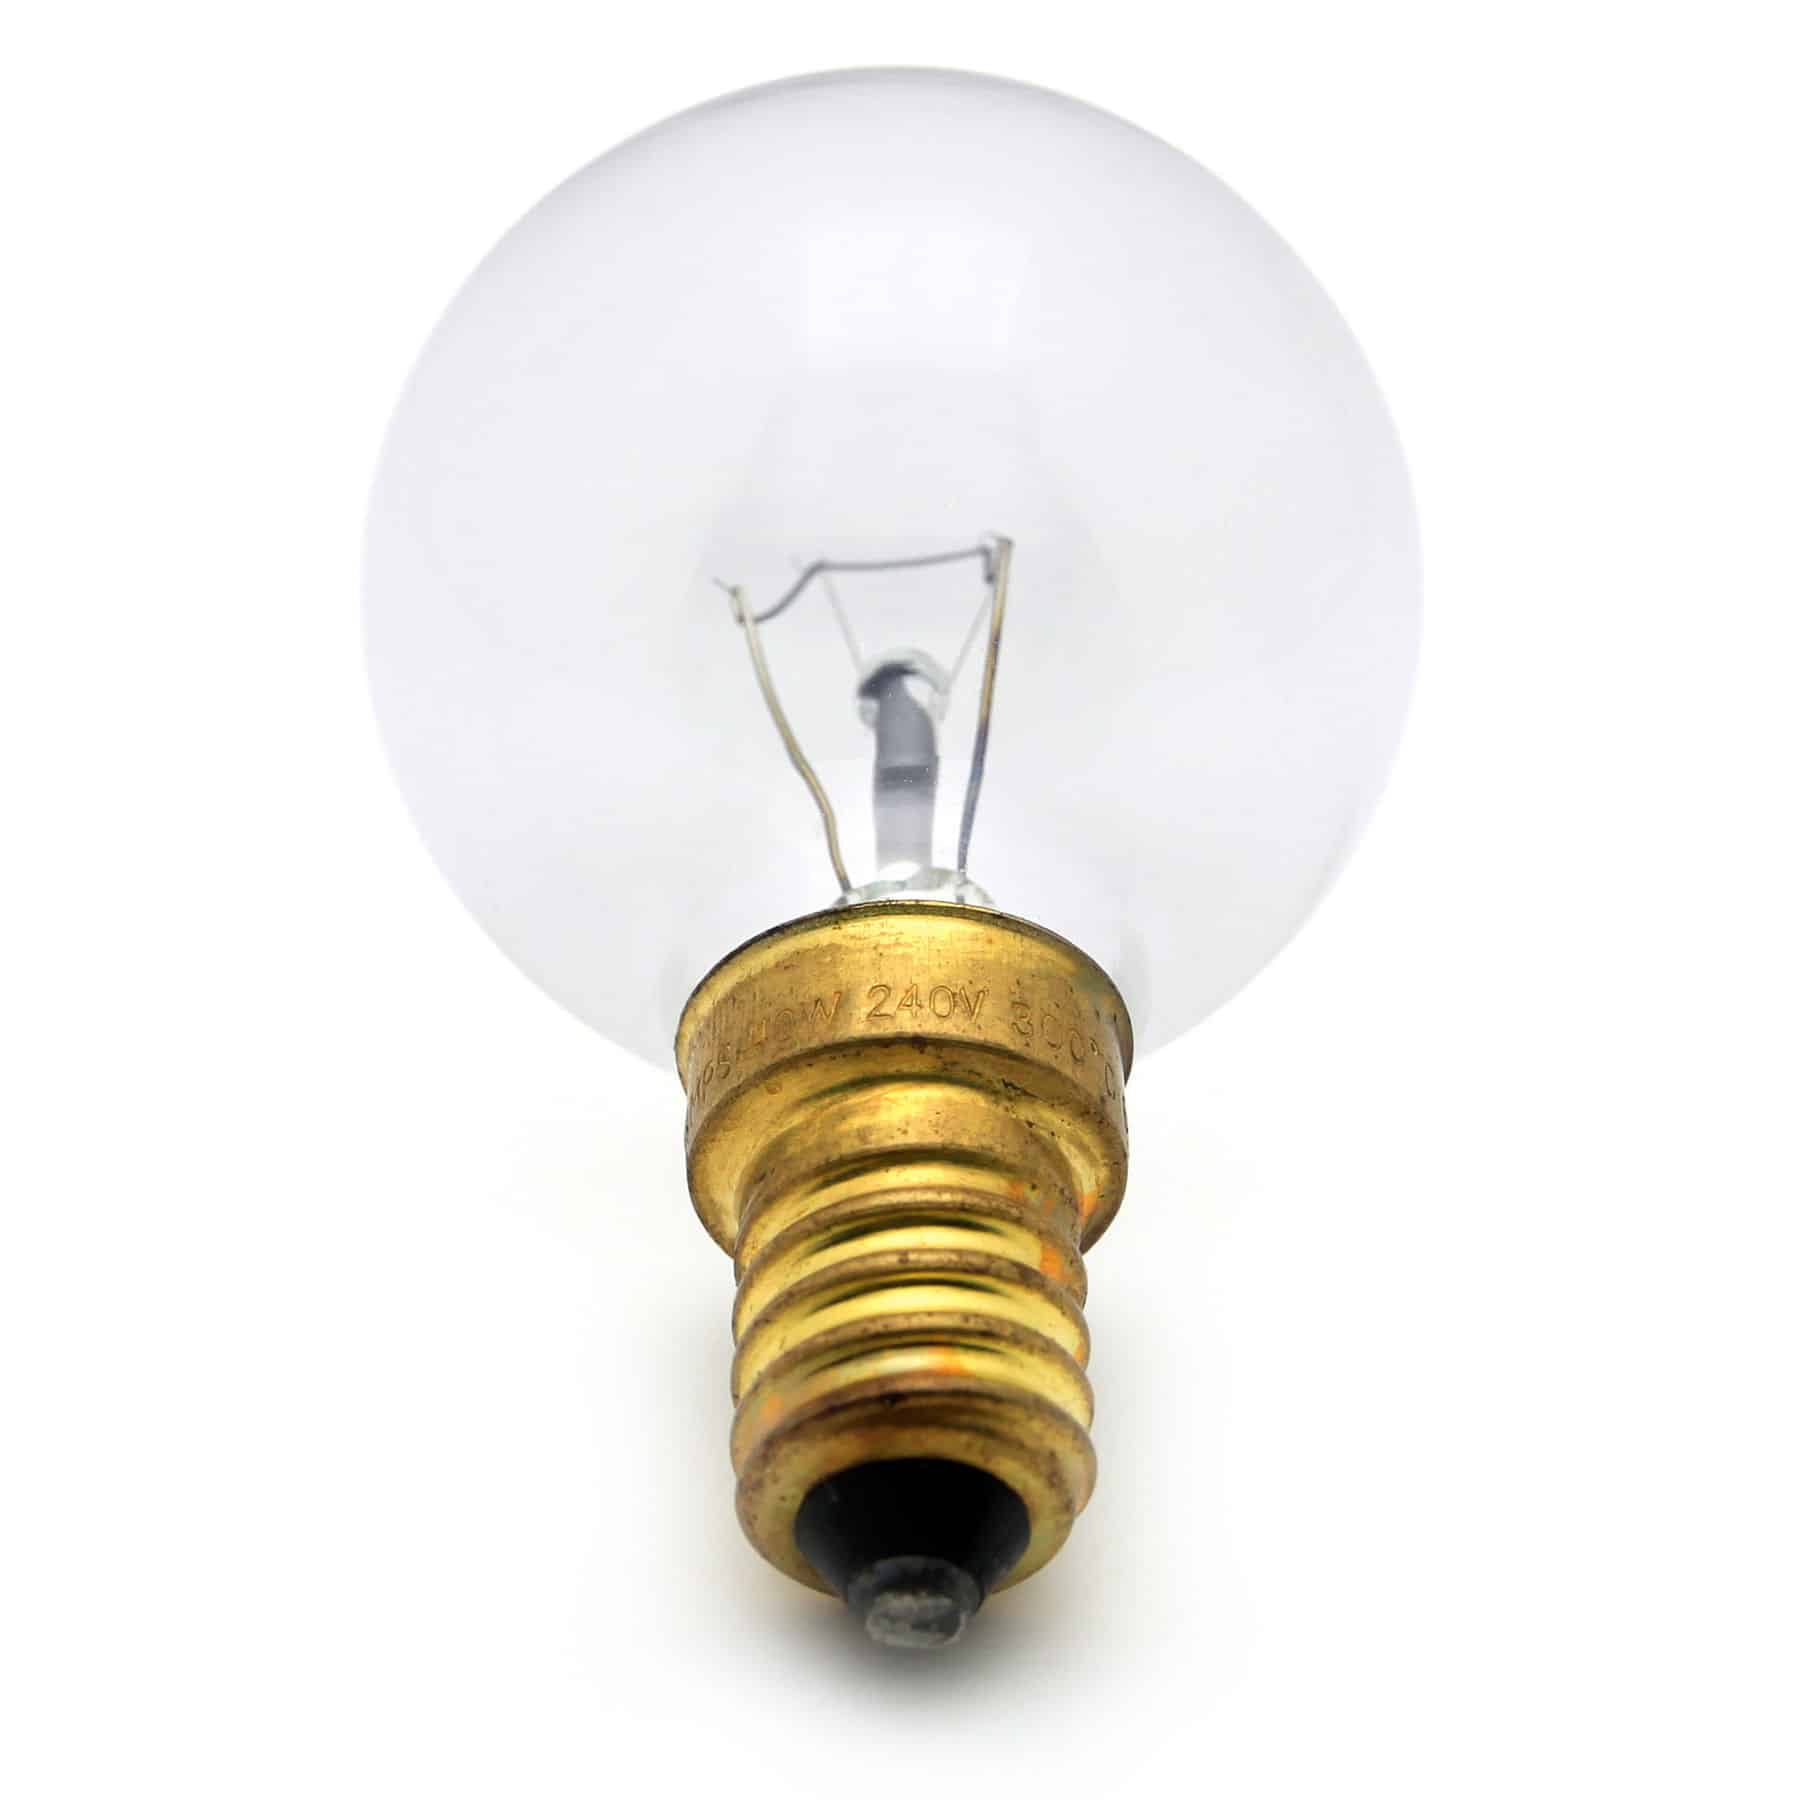 All You Need to Know About Appliance Light Bulbs - The Lightbulb Co. UK